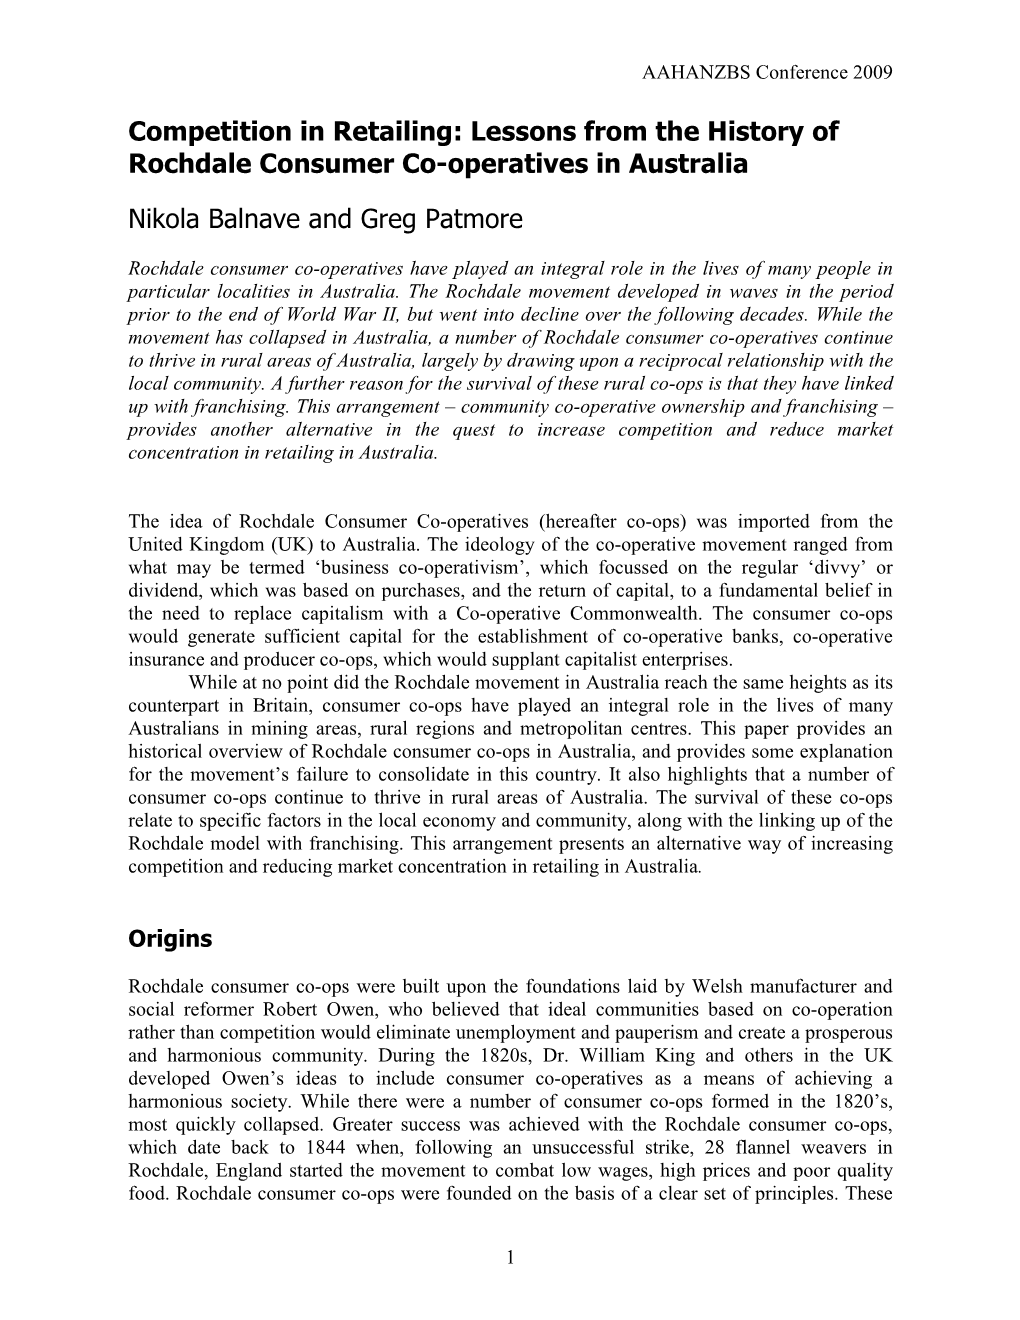 Competition in Retailing: Lessons from the History of Rochdale Consumer Co-Operatives in Australia